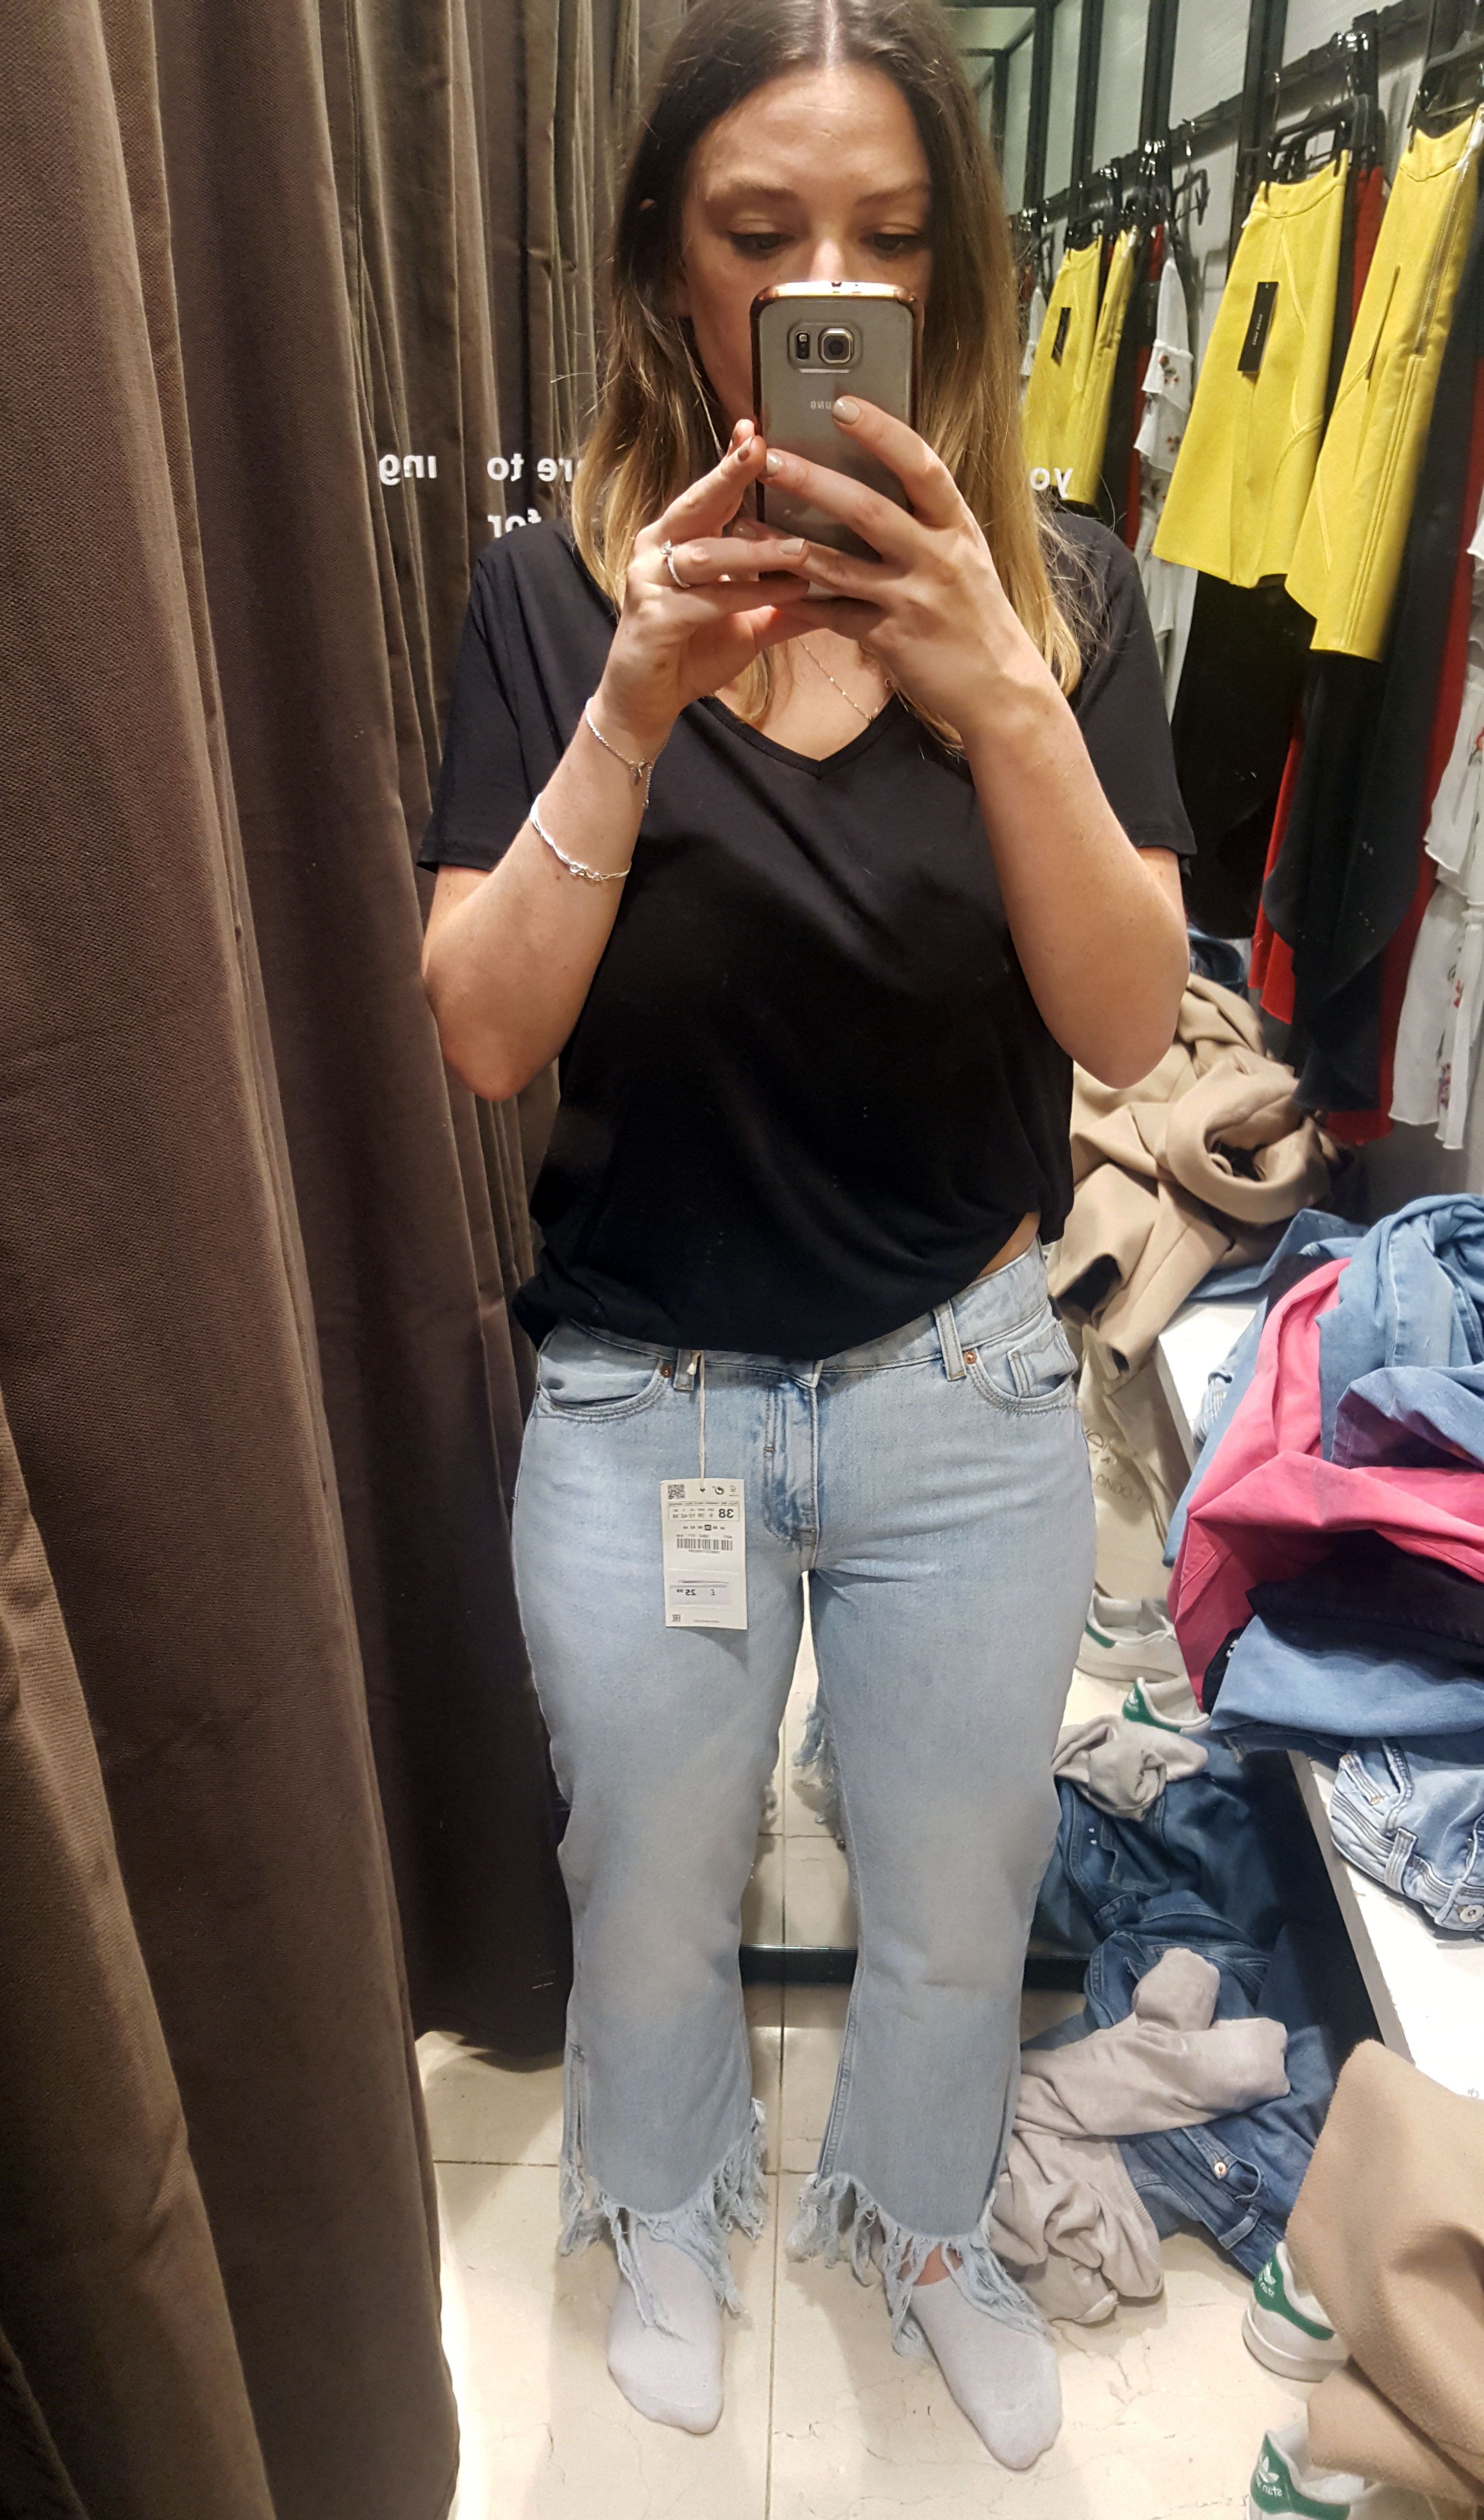 Proof that Zara clothing sizes are BS 